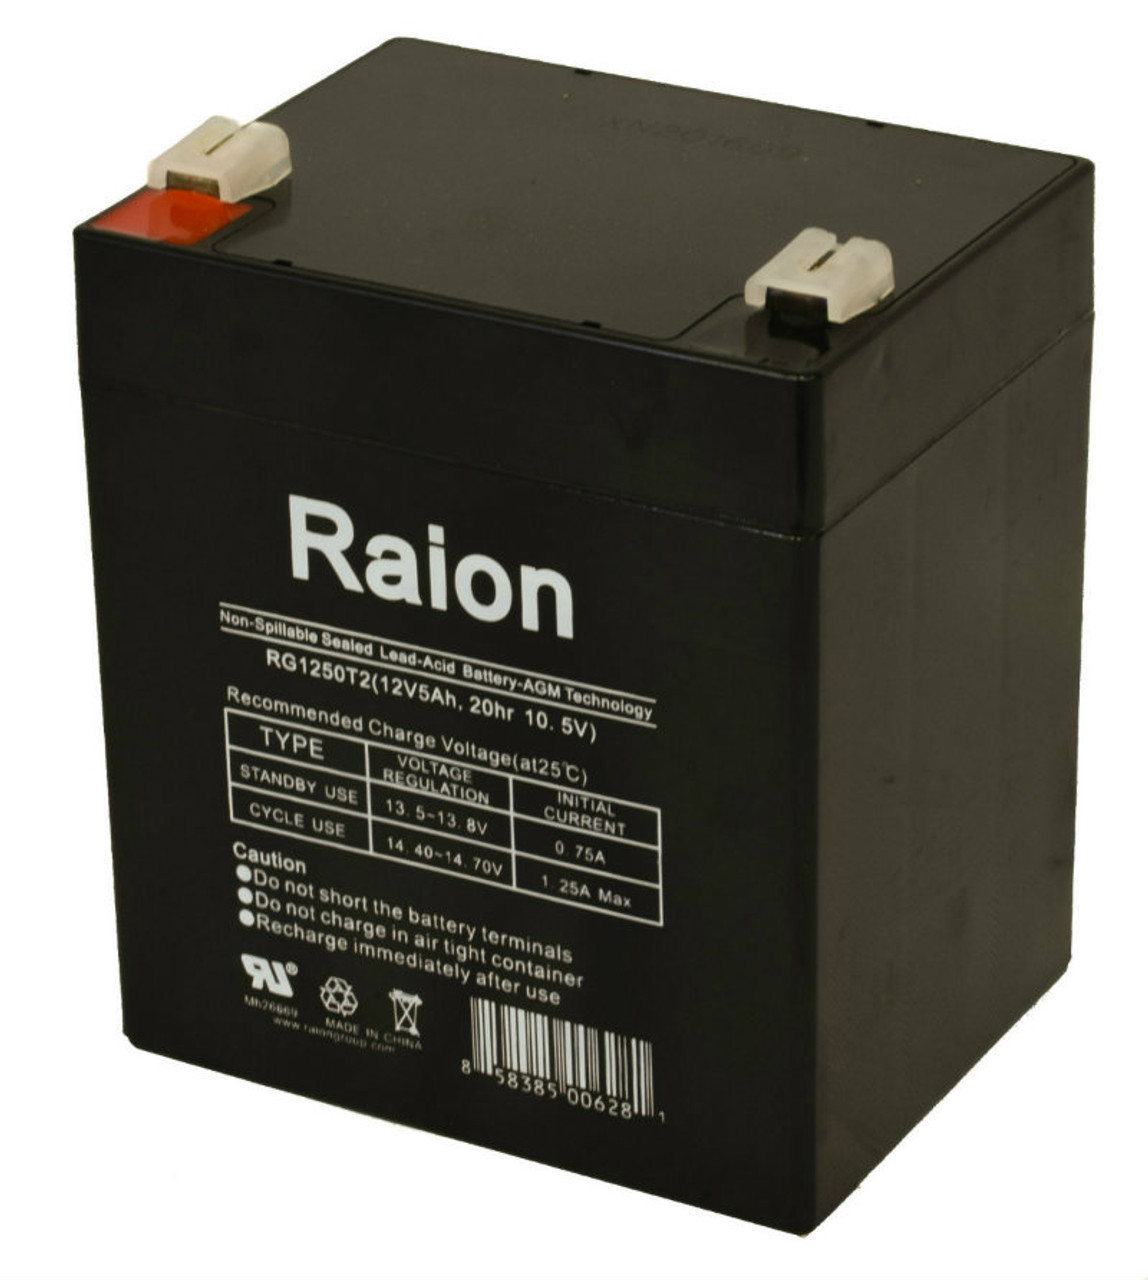 Raion Power RG1250T2 Replacement AGM Battery for Qaba Adjustable Folding E-Scooter LED Light AA1-029BK